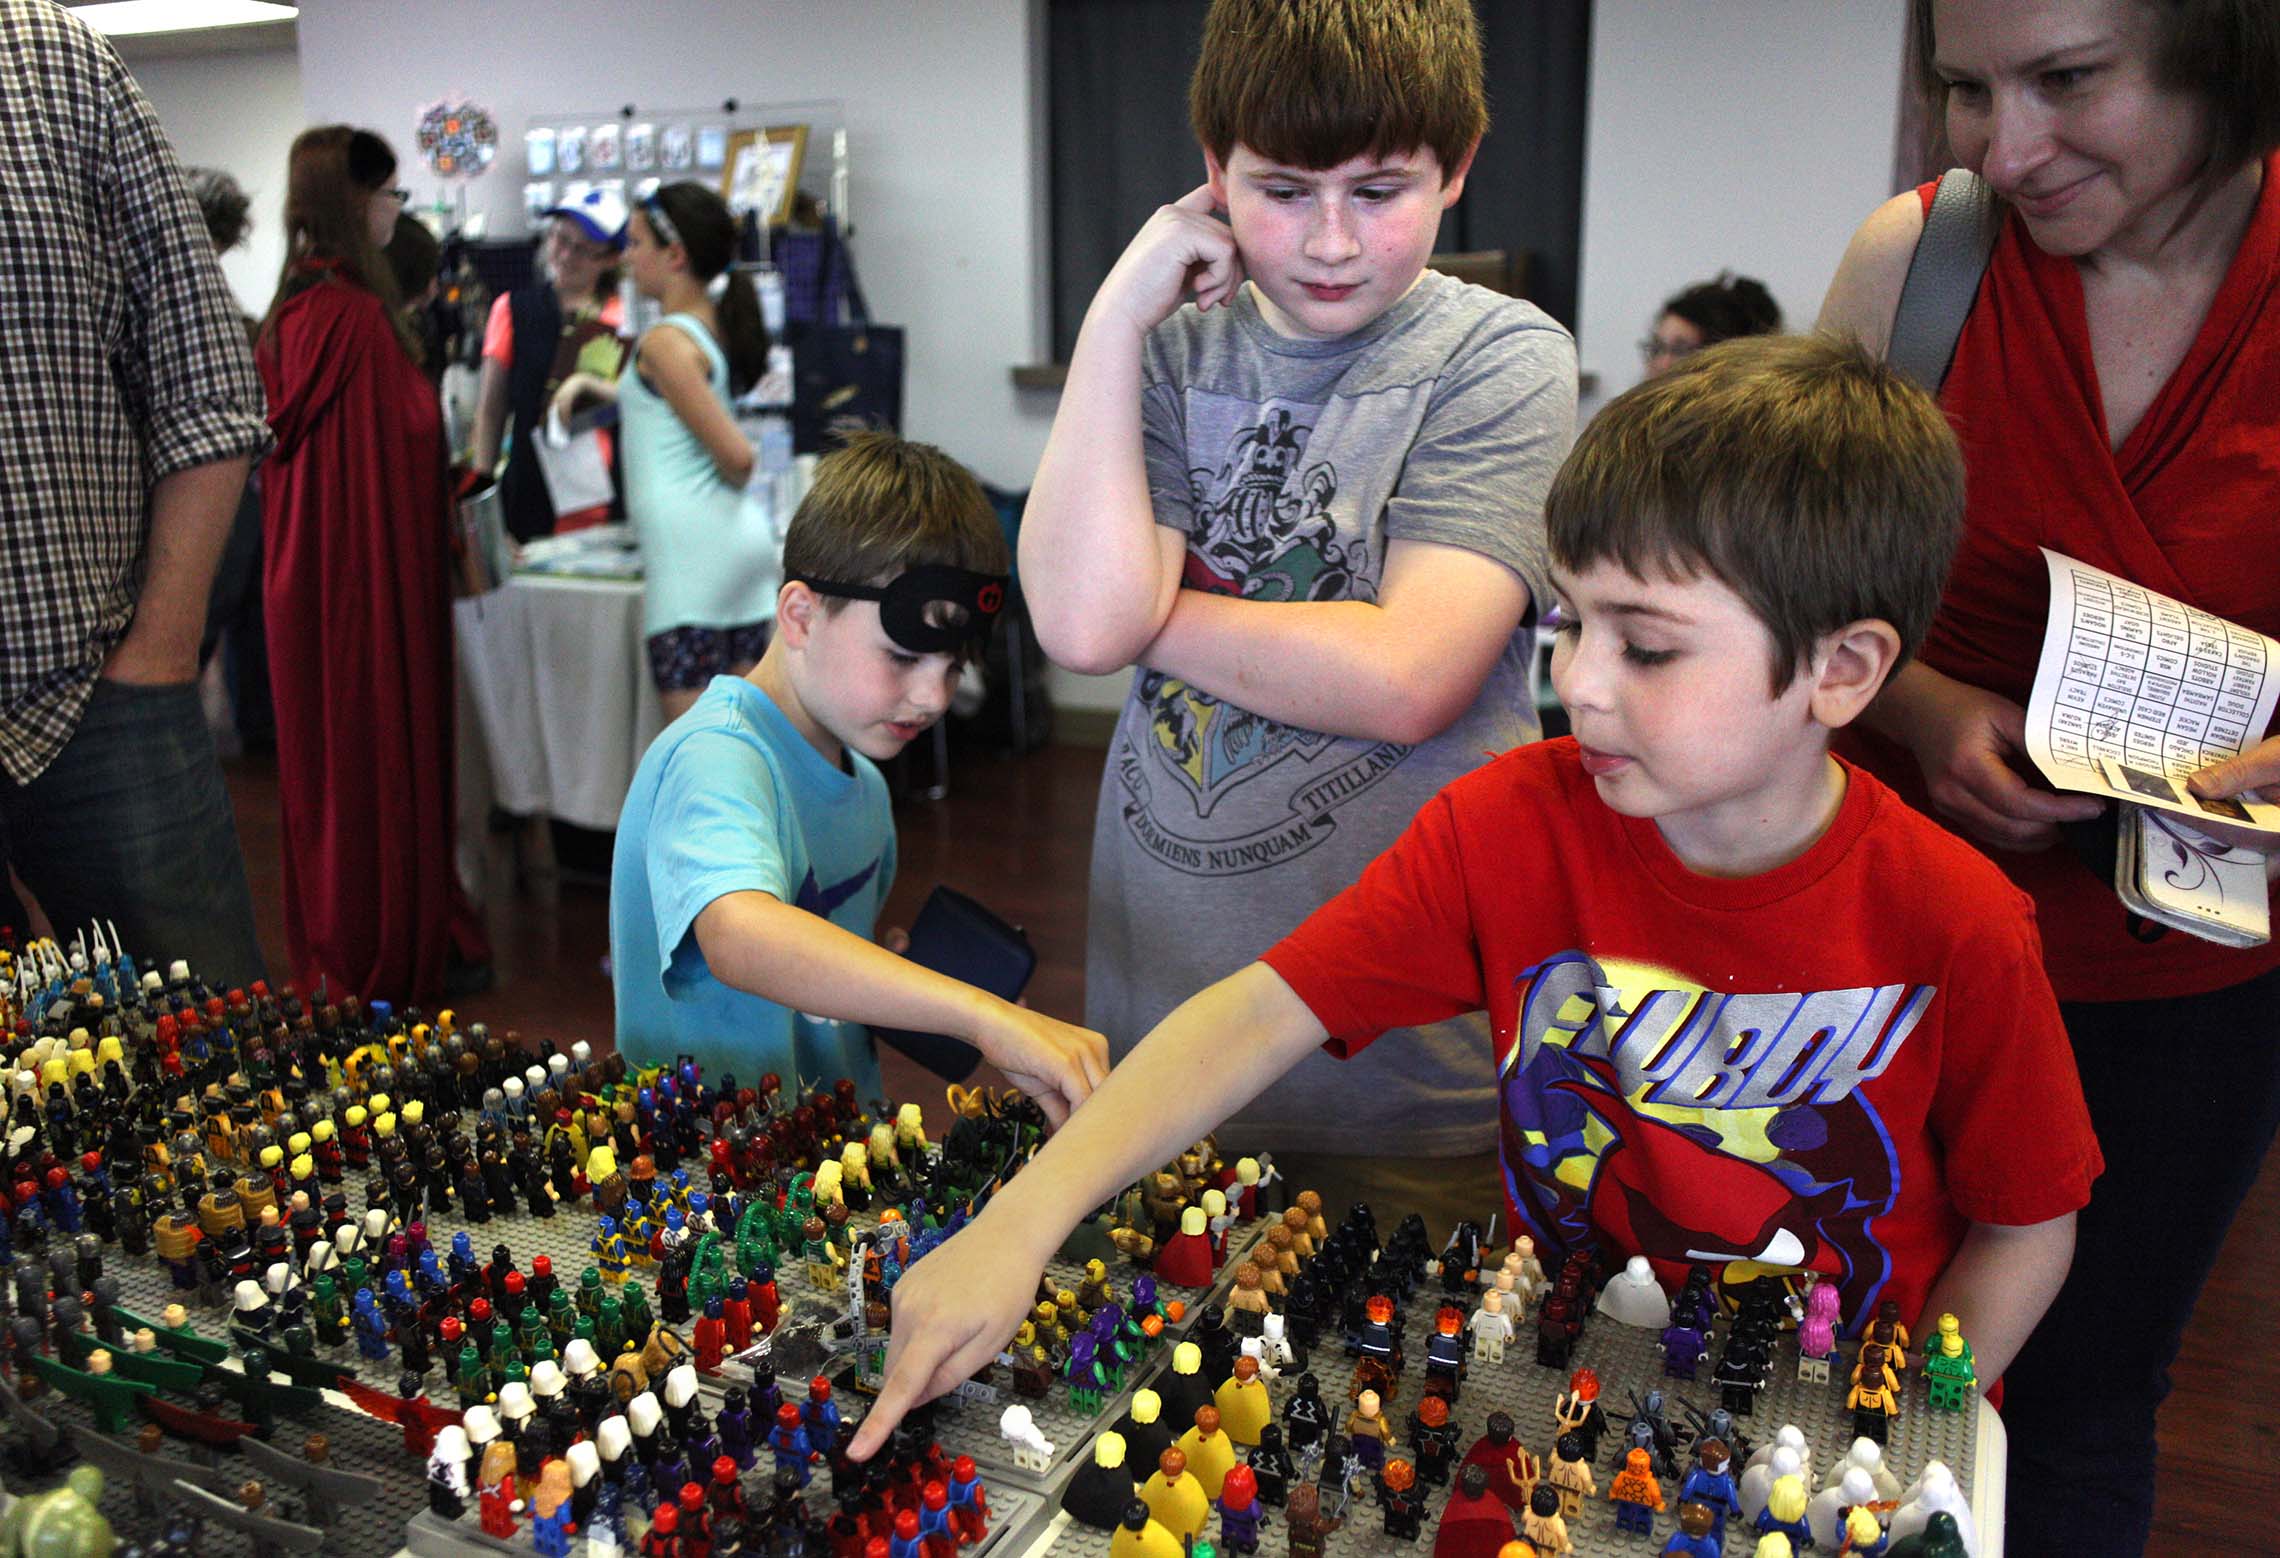  Harper Sexton, Logan Trudeau, and Colin Trudeau, from left to right, check out lego figures Saturday during the 8th Annual Kankakee Fantasy Con at the Kankakee Public Library. Logan and Colin's' father said they have a whole spare room dedicated to 